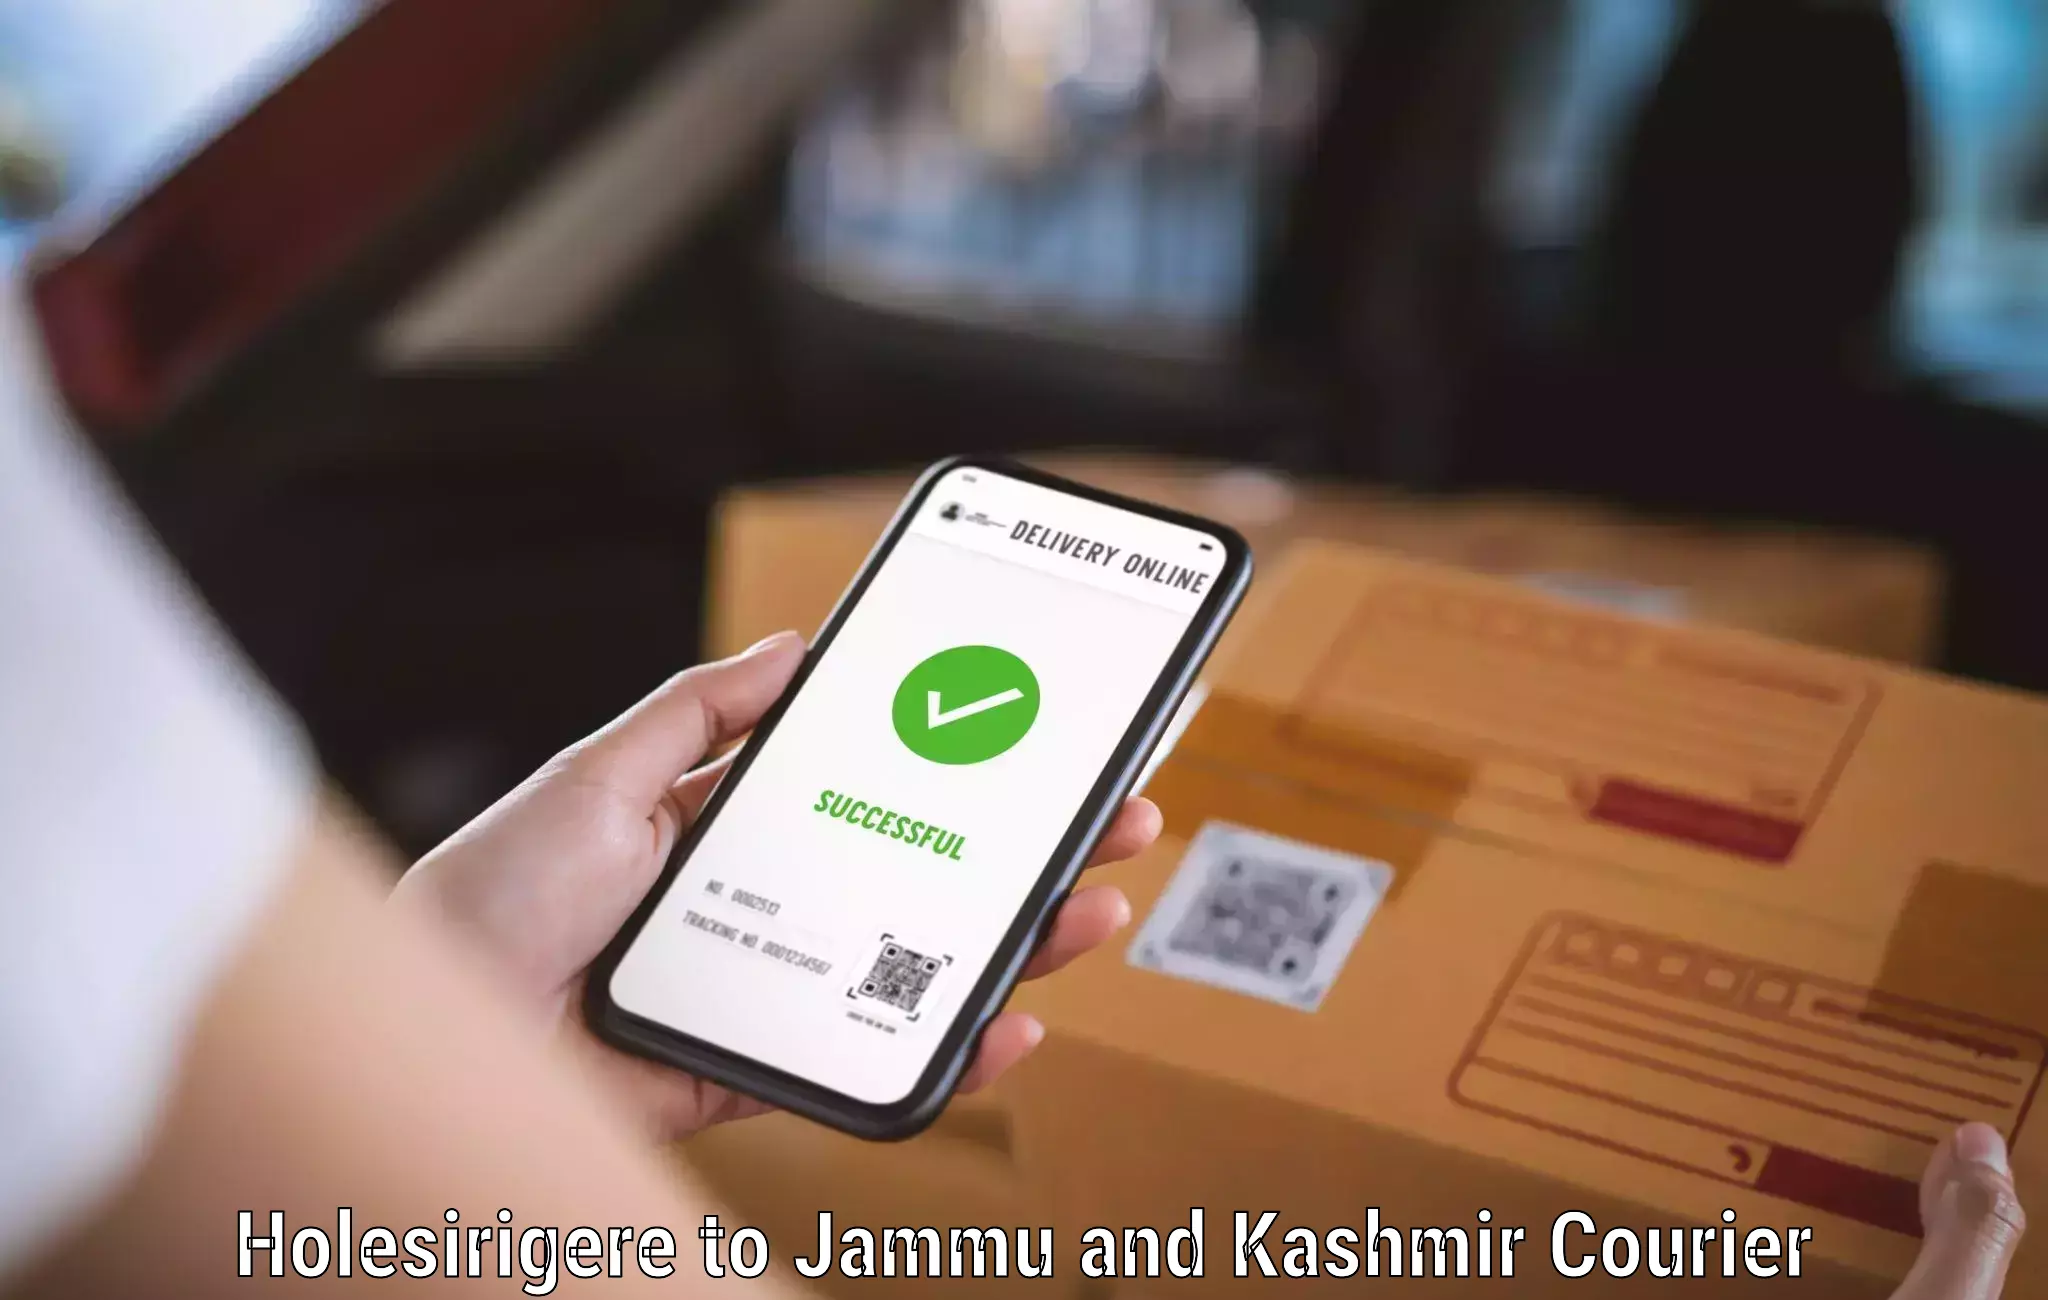 Courier service booking Holesirigere to Jammu